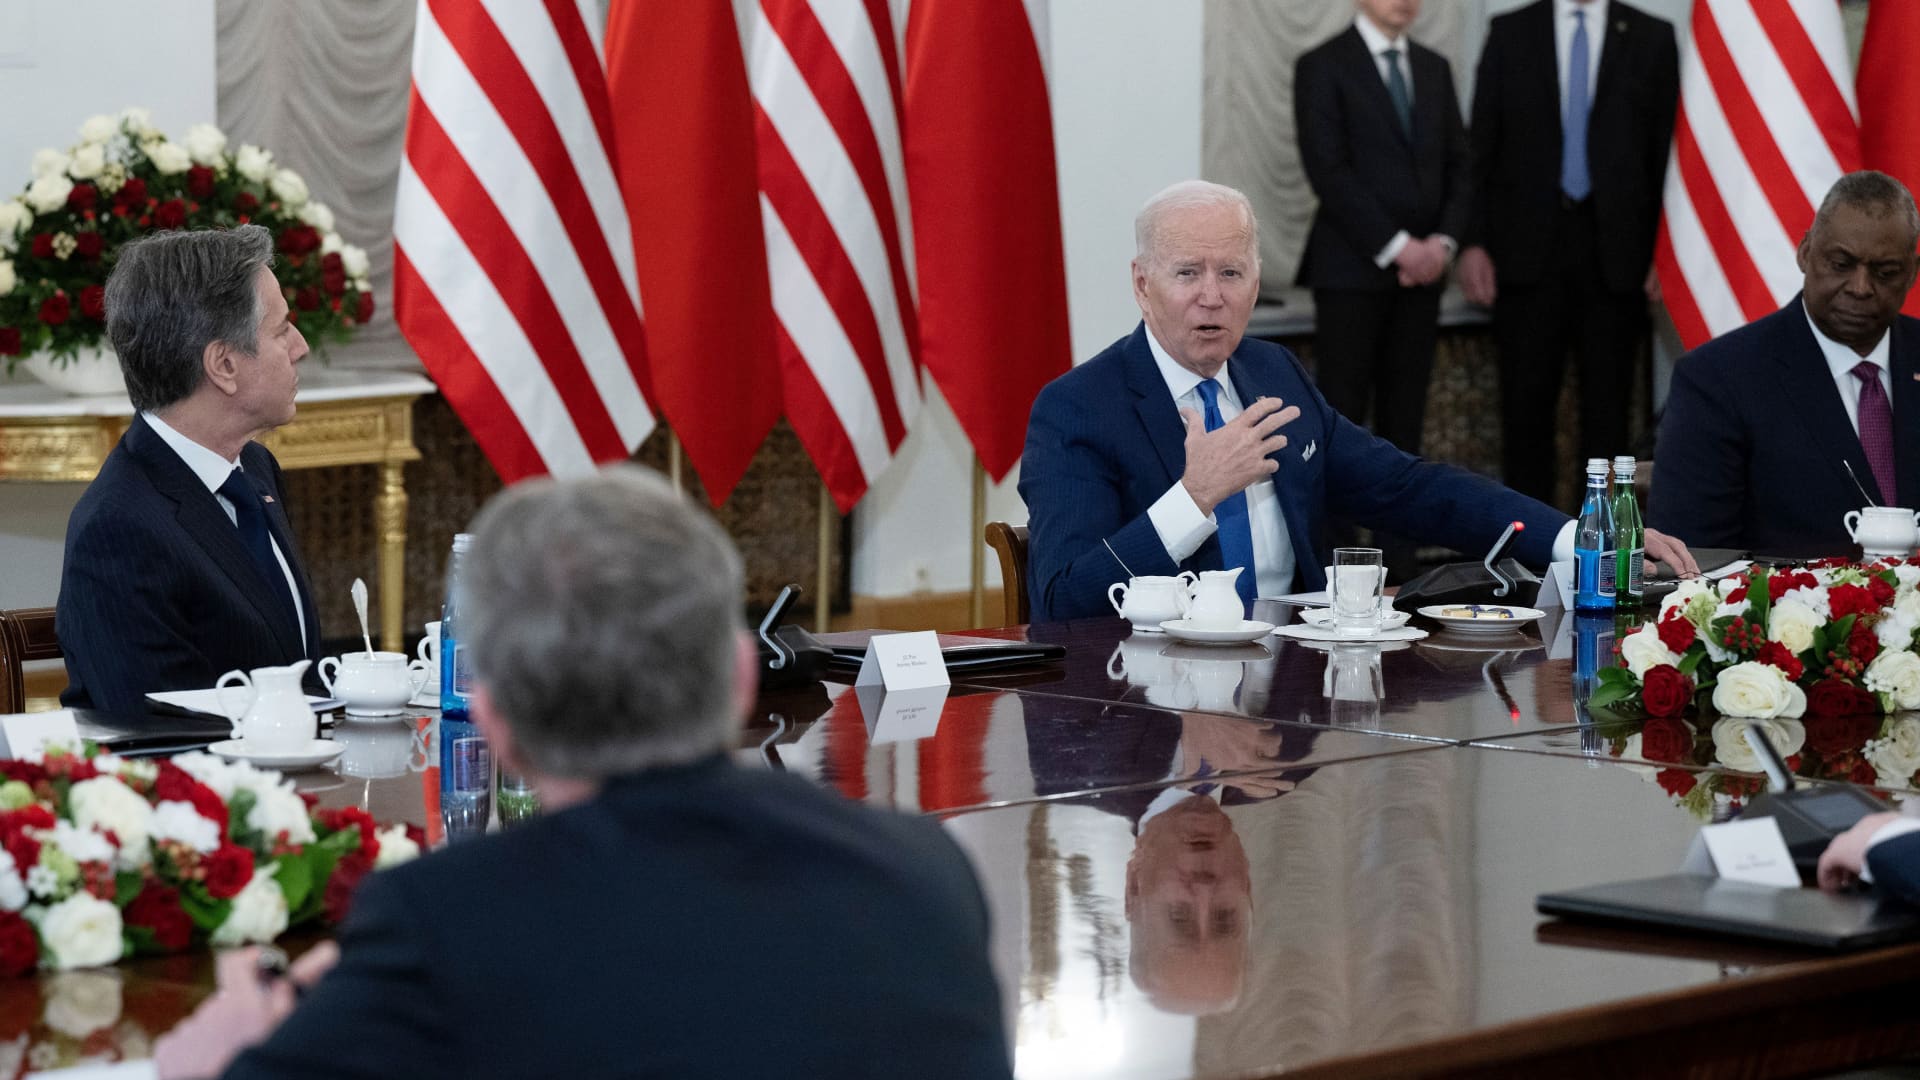 US Secretary of State Antony Blinken (L) and US Secretary of Defence Lloyd Austin (R) listen while US President Joe Biden speaks with the Polish President during a meeting on Russia's war on Ukraine at the presidential palace in Warsaw on March 26, 2022.